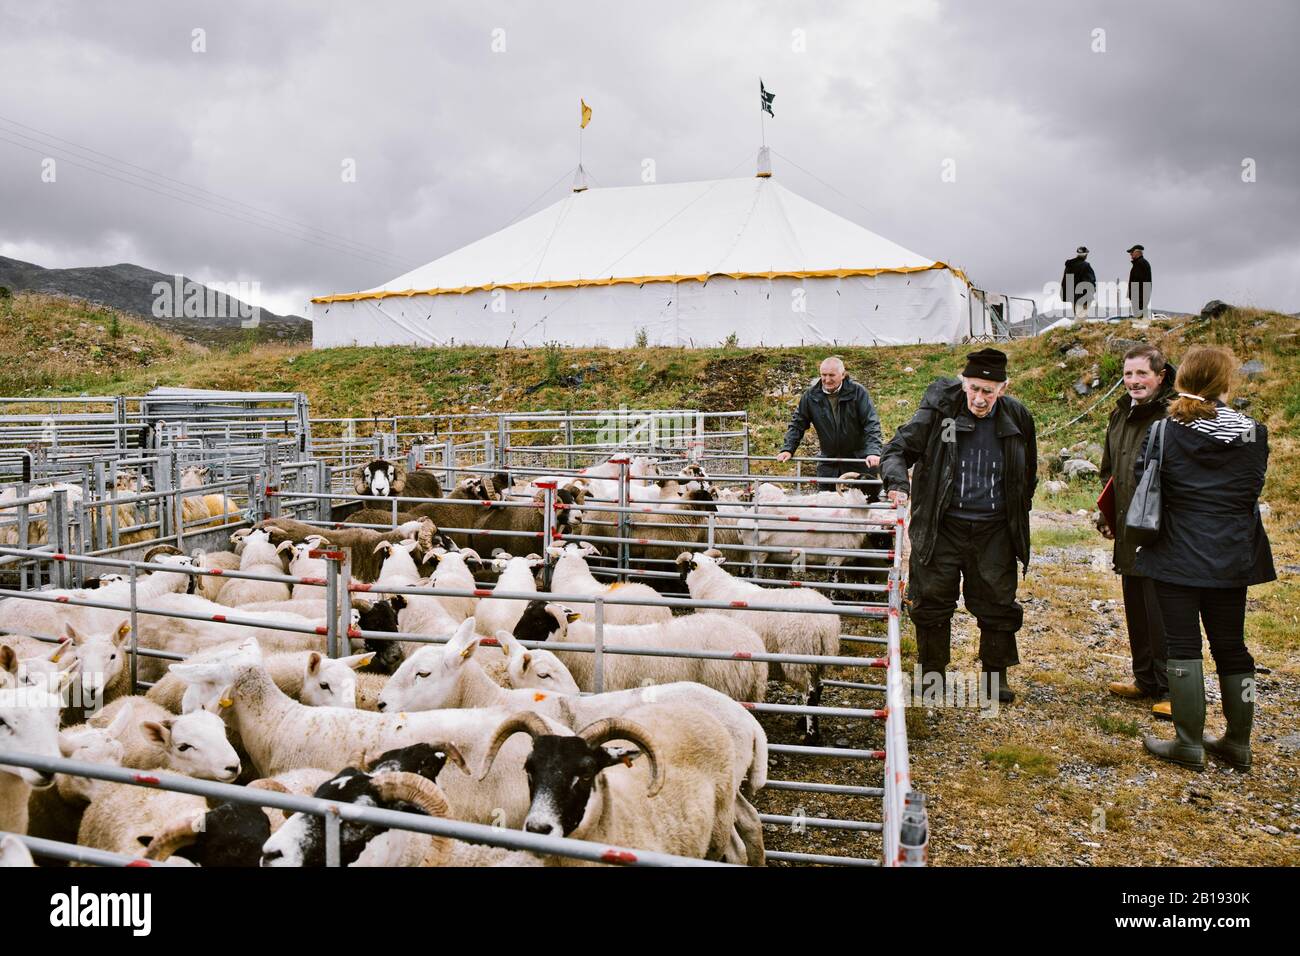 Sheep in pens waiting to be judged at the North Harris Agricultural Show, Tarbert, Isle of Harris, Outer Hebrides, Scotland Stock Photo